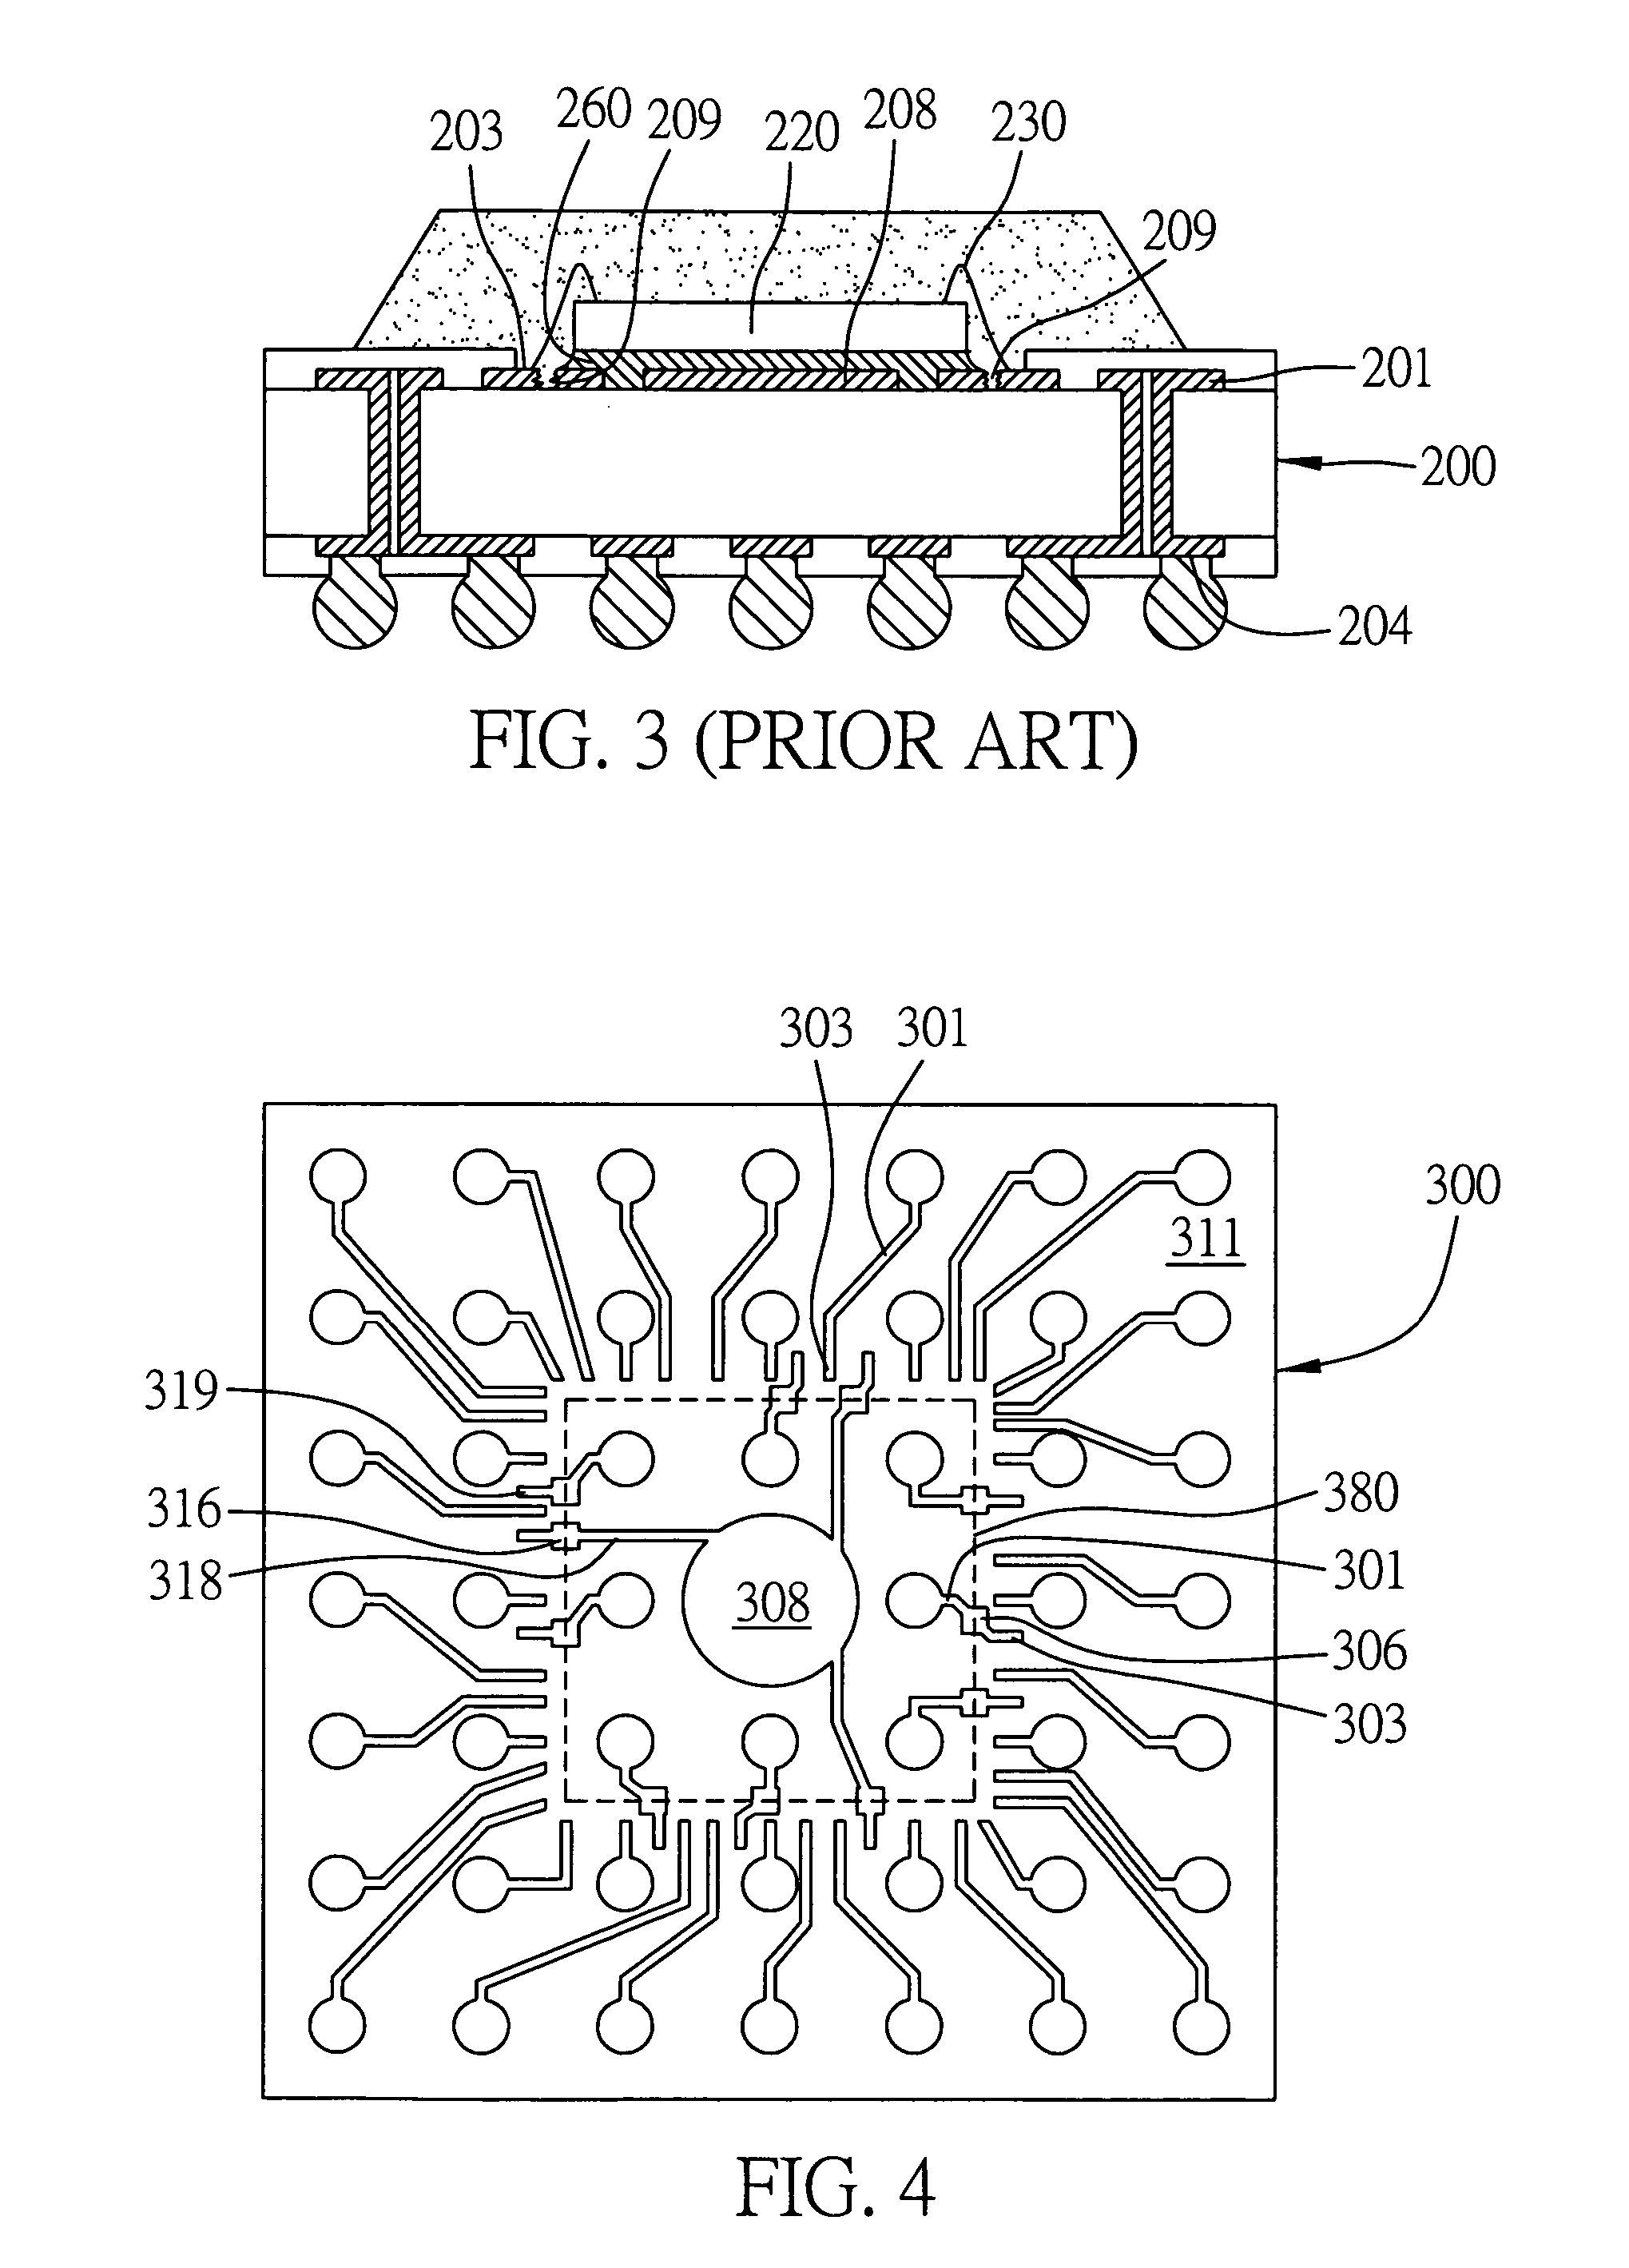 Conductive trace structure and semiconductor package having the conductive trace structure